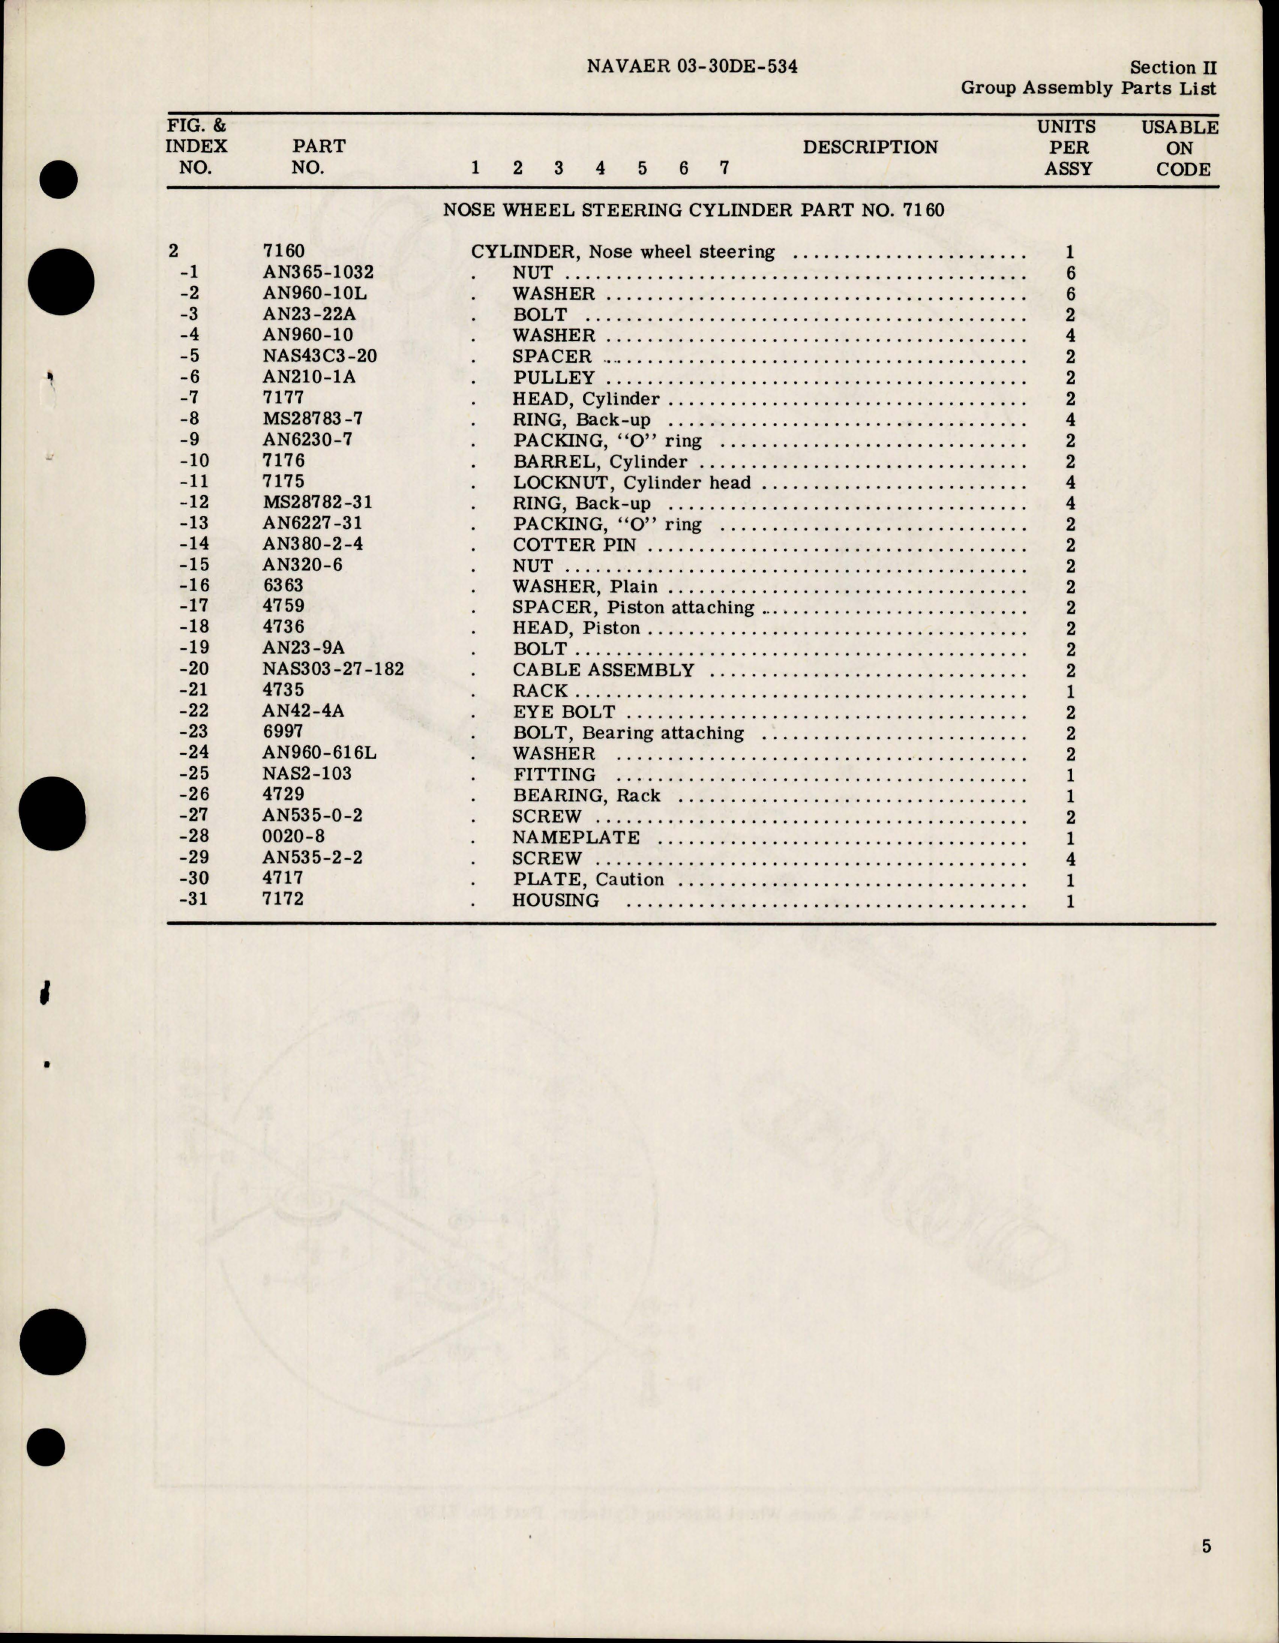 Sample page 7 from AirCorps Library document: Illustrated Parts Breakdown for Nose Wheel Steering Cylinders - Parts 6250, 6250-2, 7160, 7160-2, 10150, 10260 